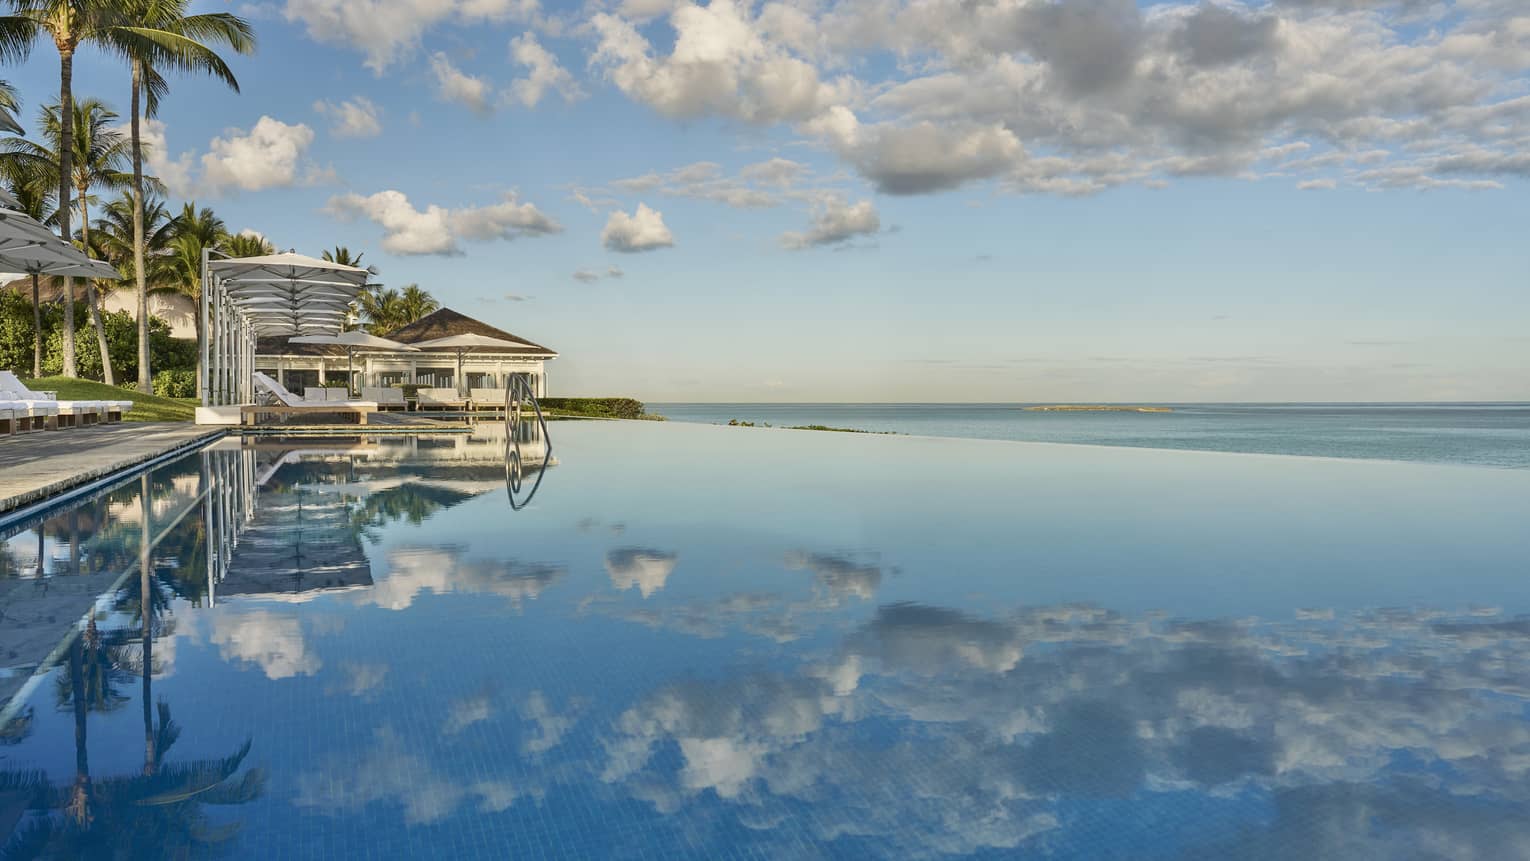 A building on the shore with clouds reflecting in the ocean water.